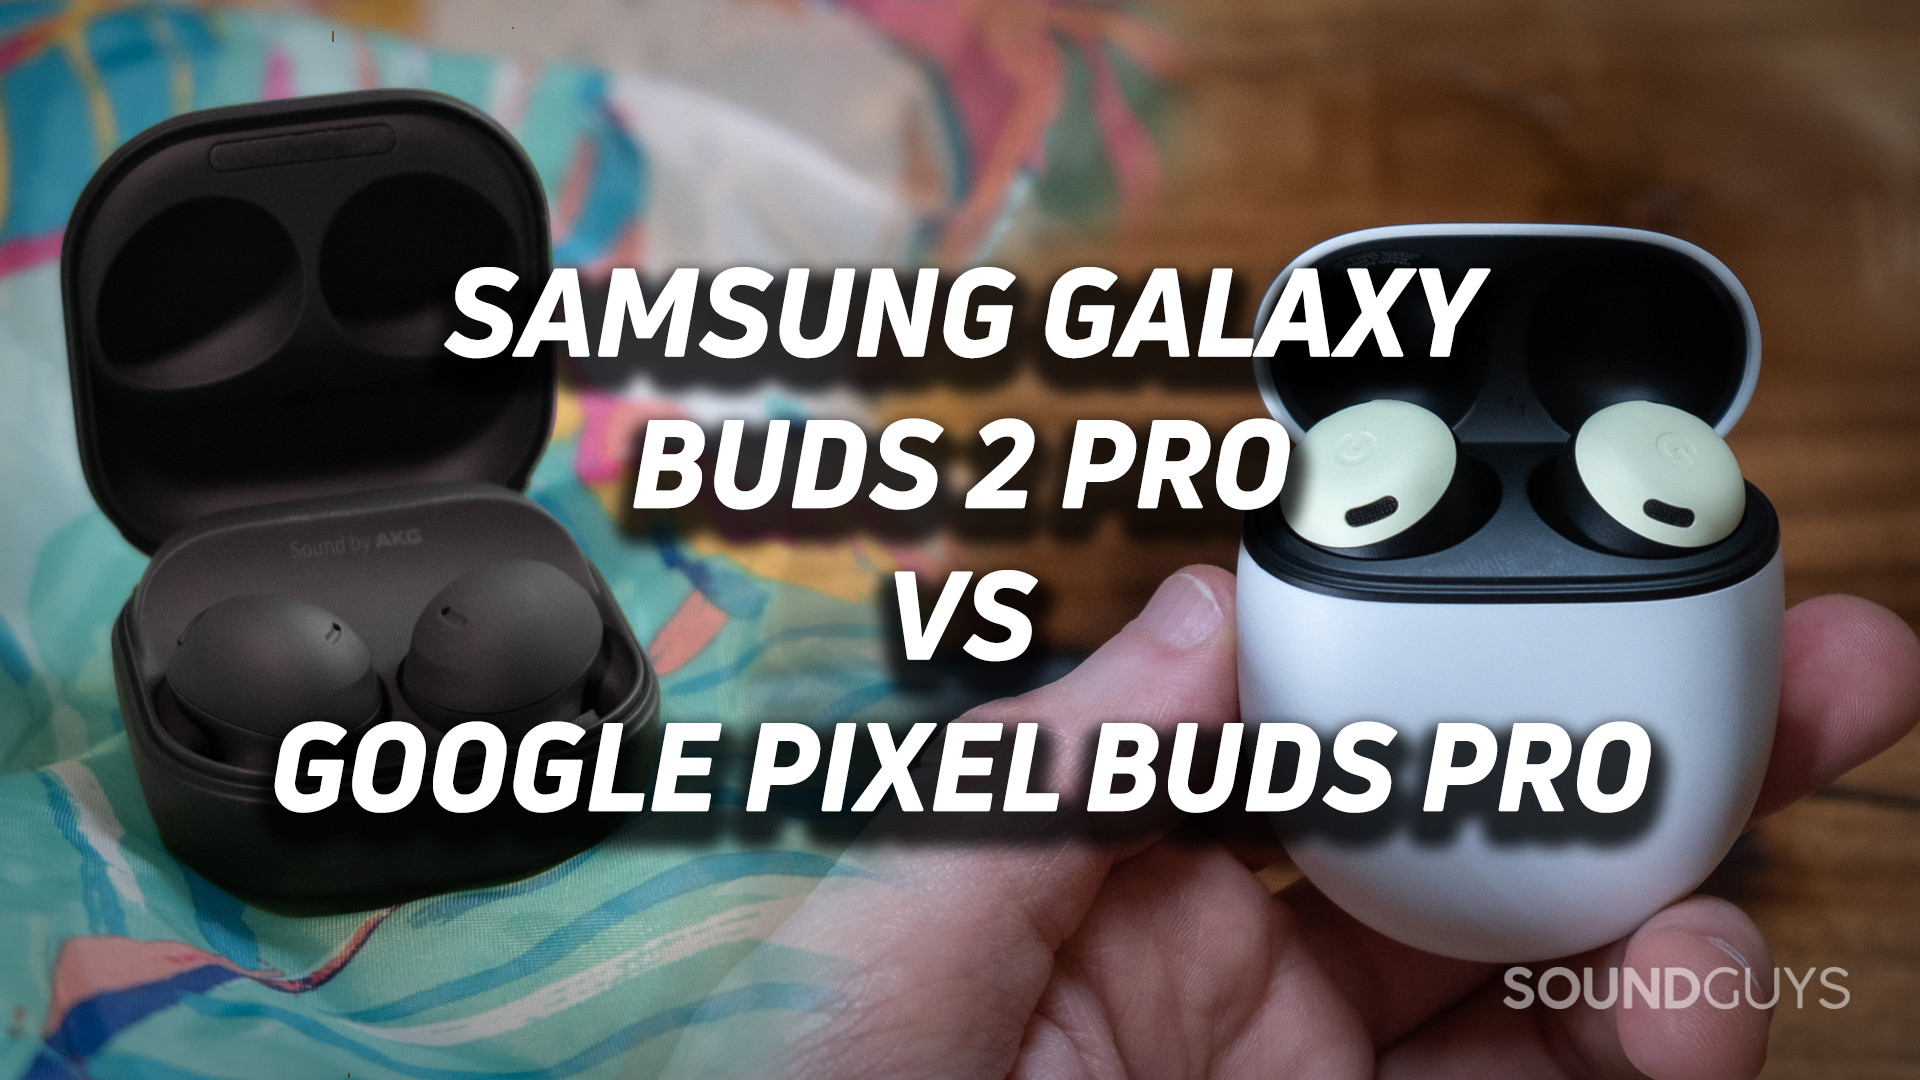 Two overlaying images show the Samsung Galaxy Buds 2 Pro on the left and the Google Pixel Buds Pro on the right, with text over top.